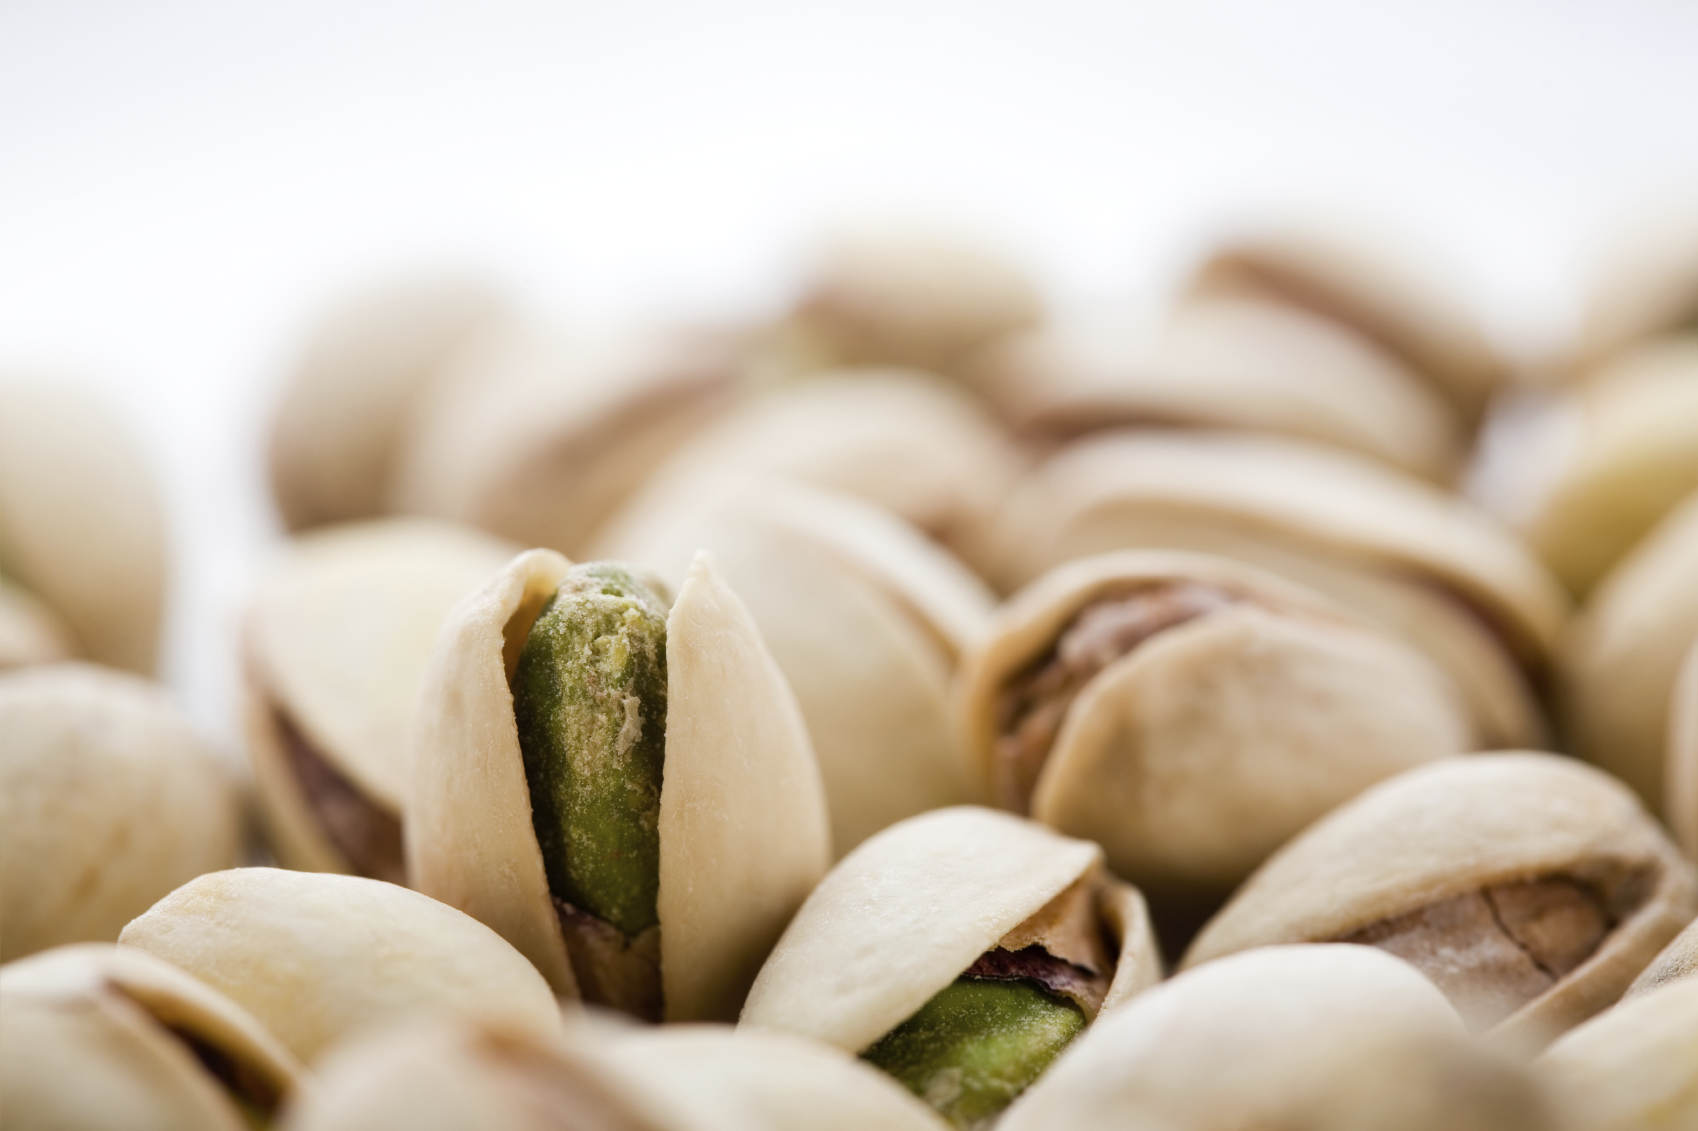 Eating just a few handfuls of this snack a day may help tame your blood sugar.